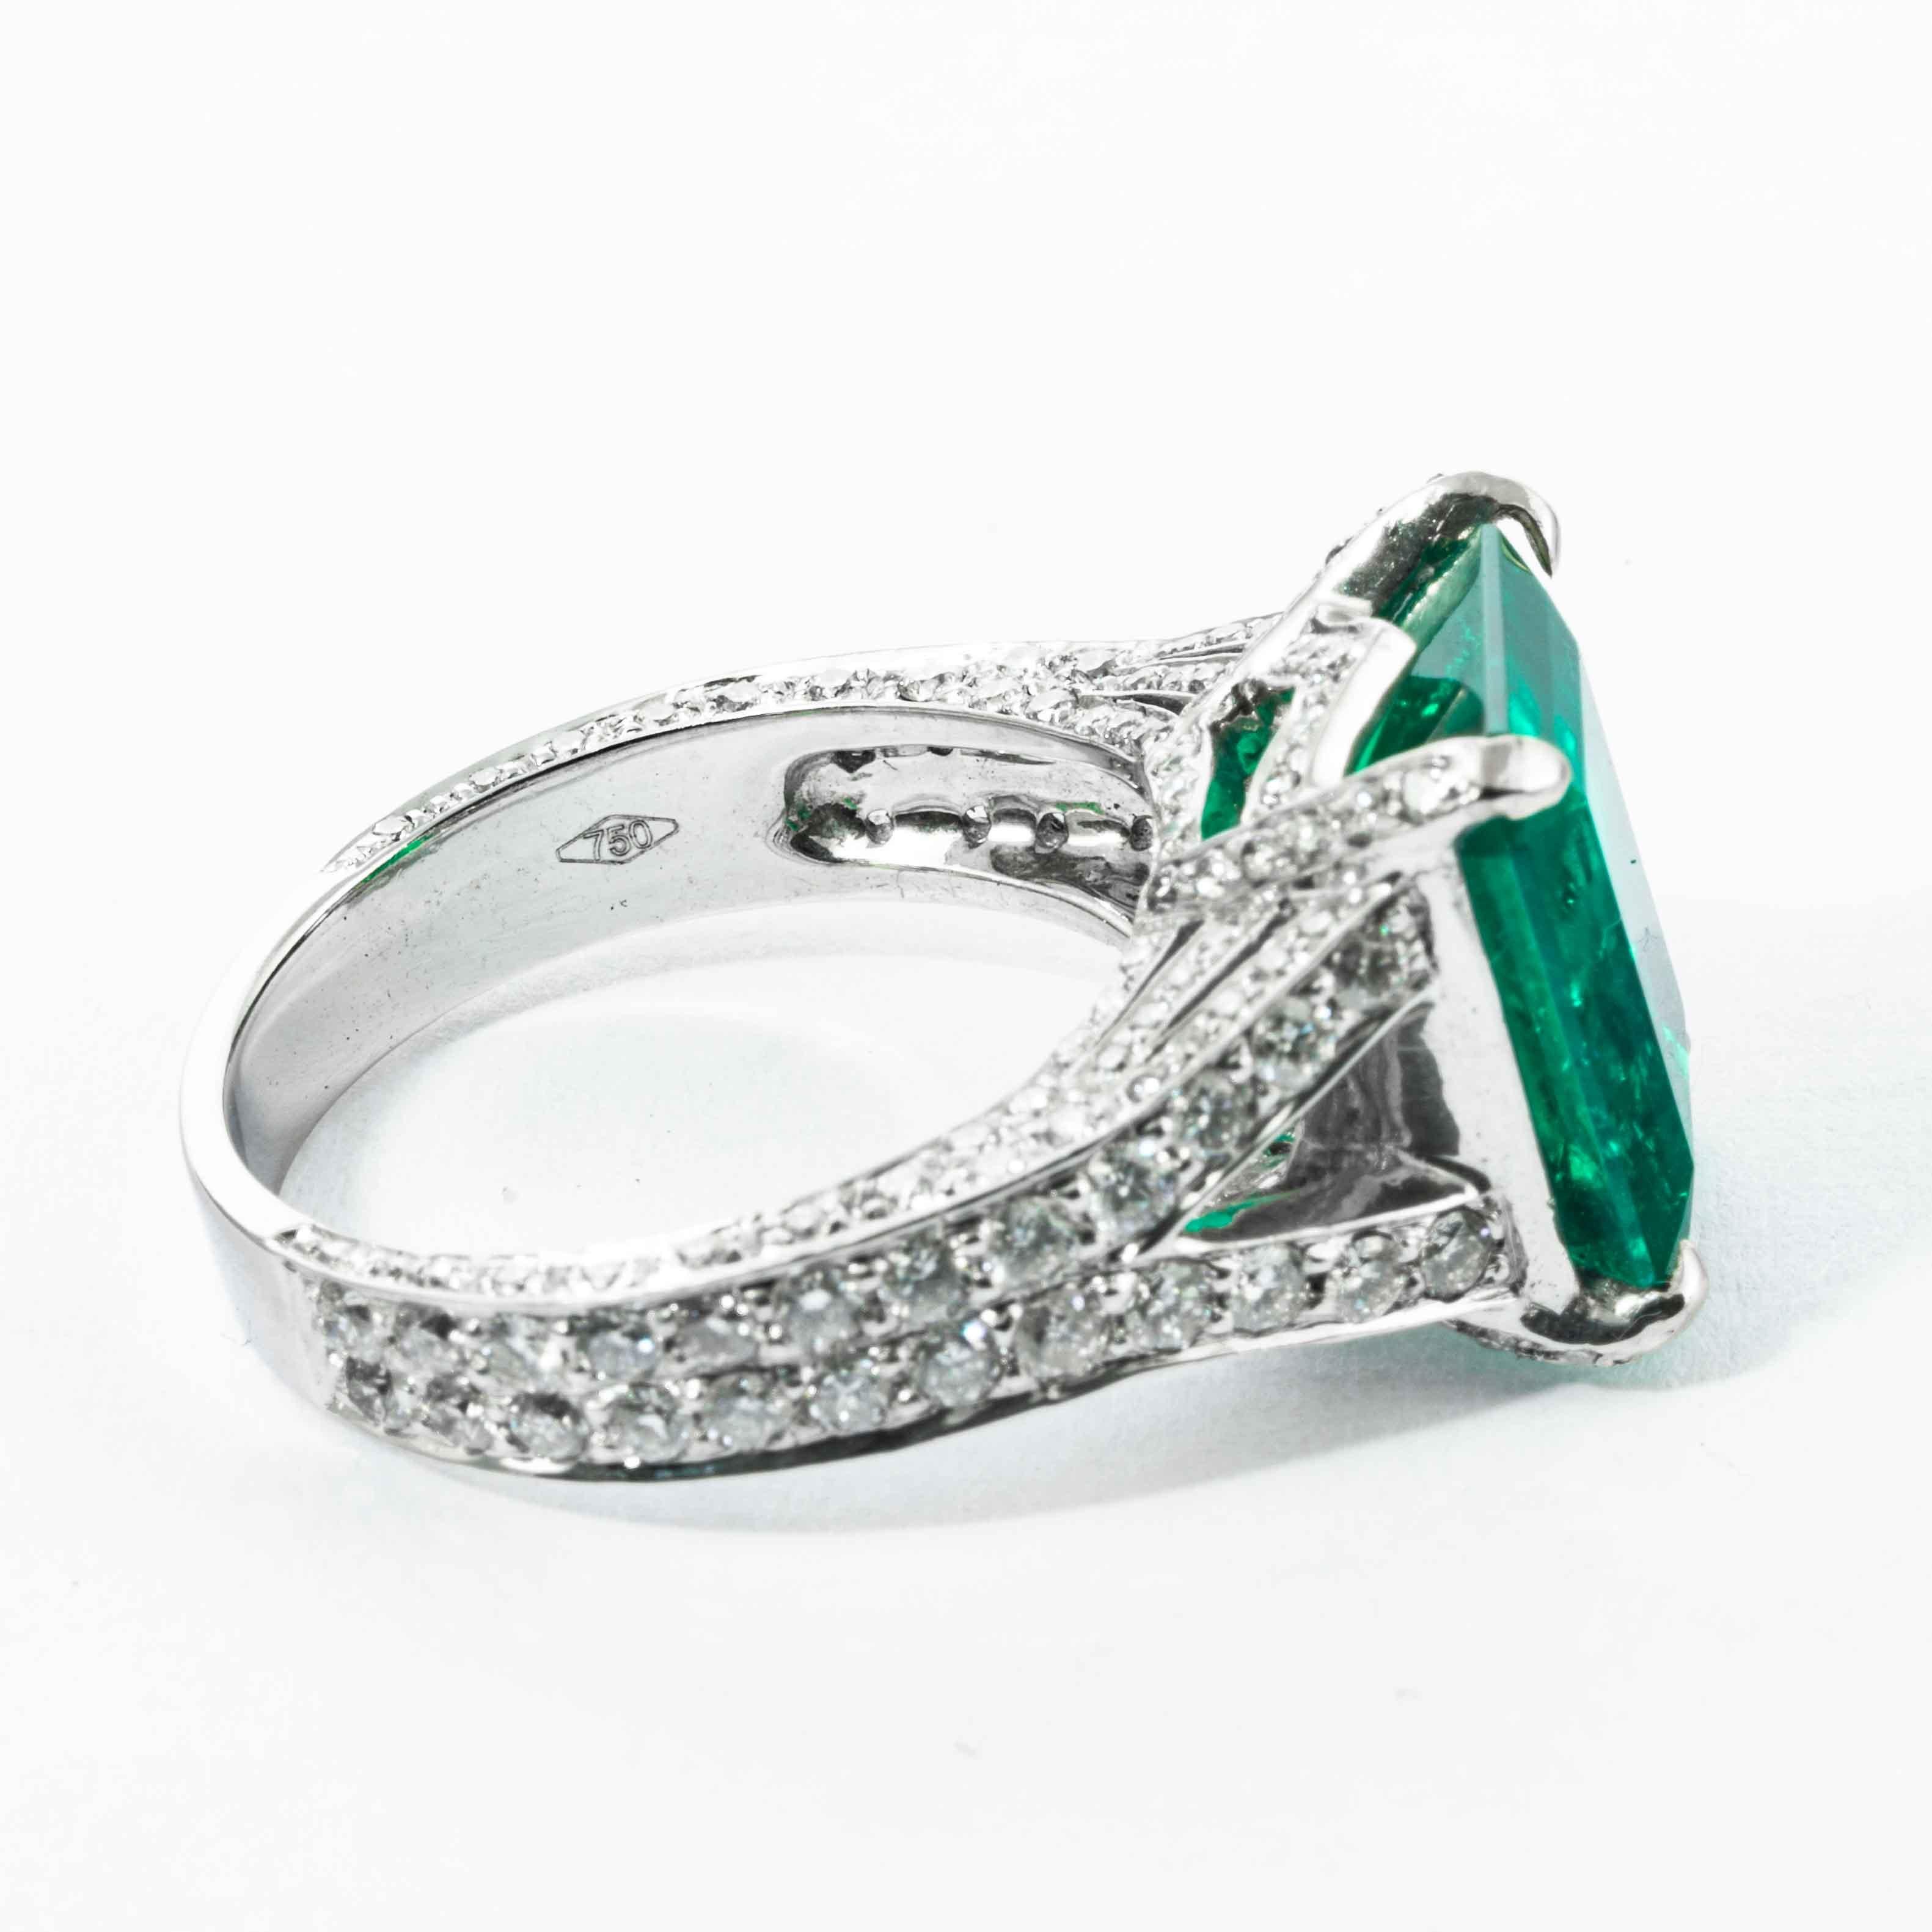 Women's Shreve, Crump & Low 6.25 Carat Colombian Emerald and Diamond White Gold Ring For Sale